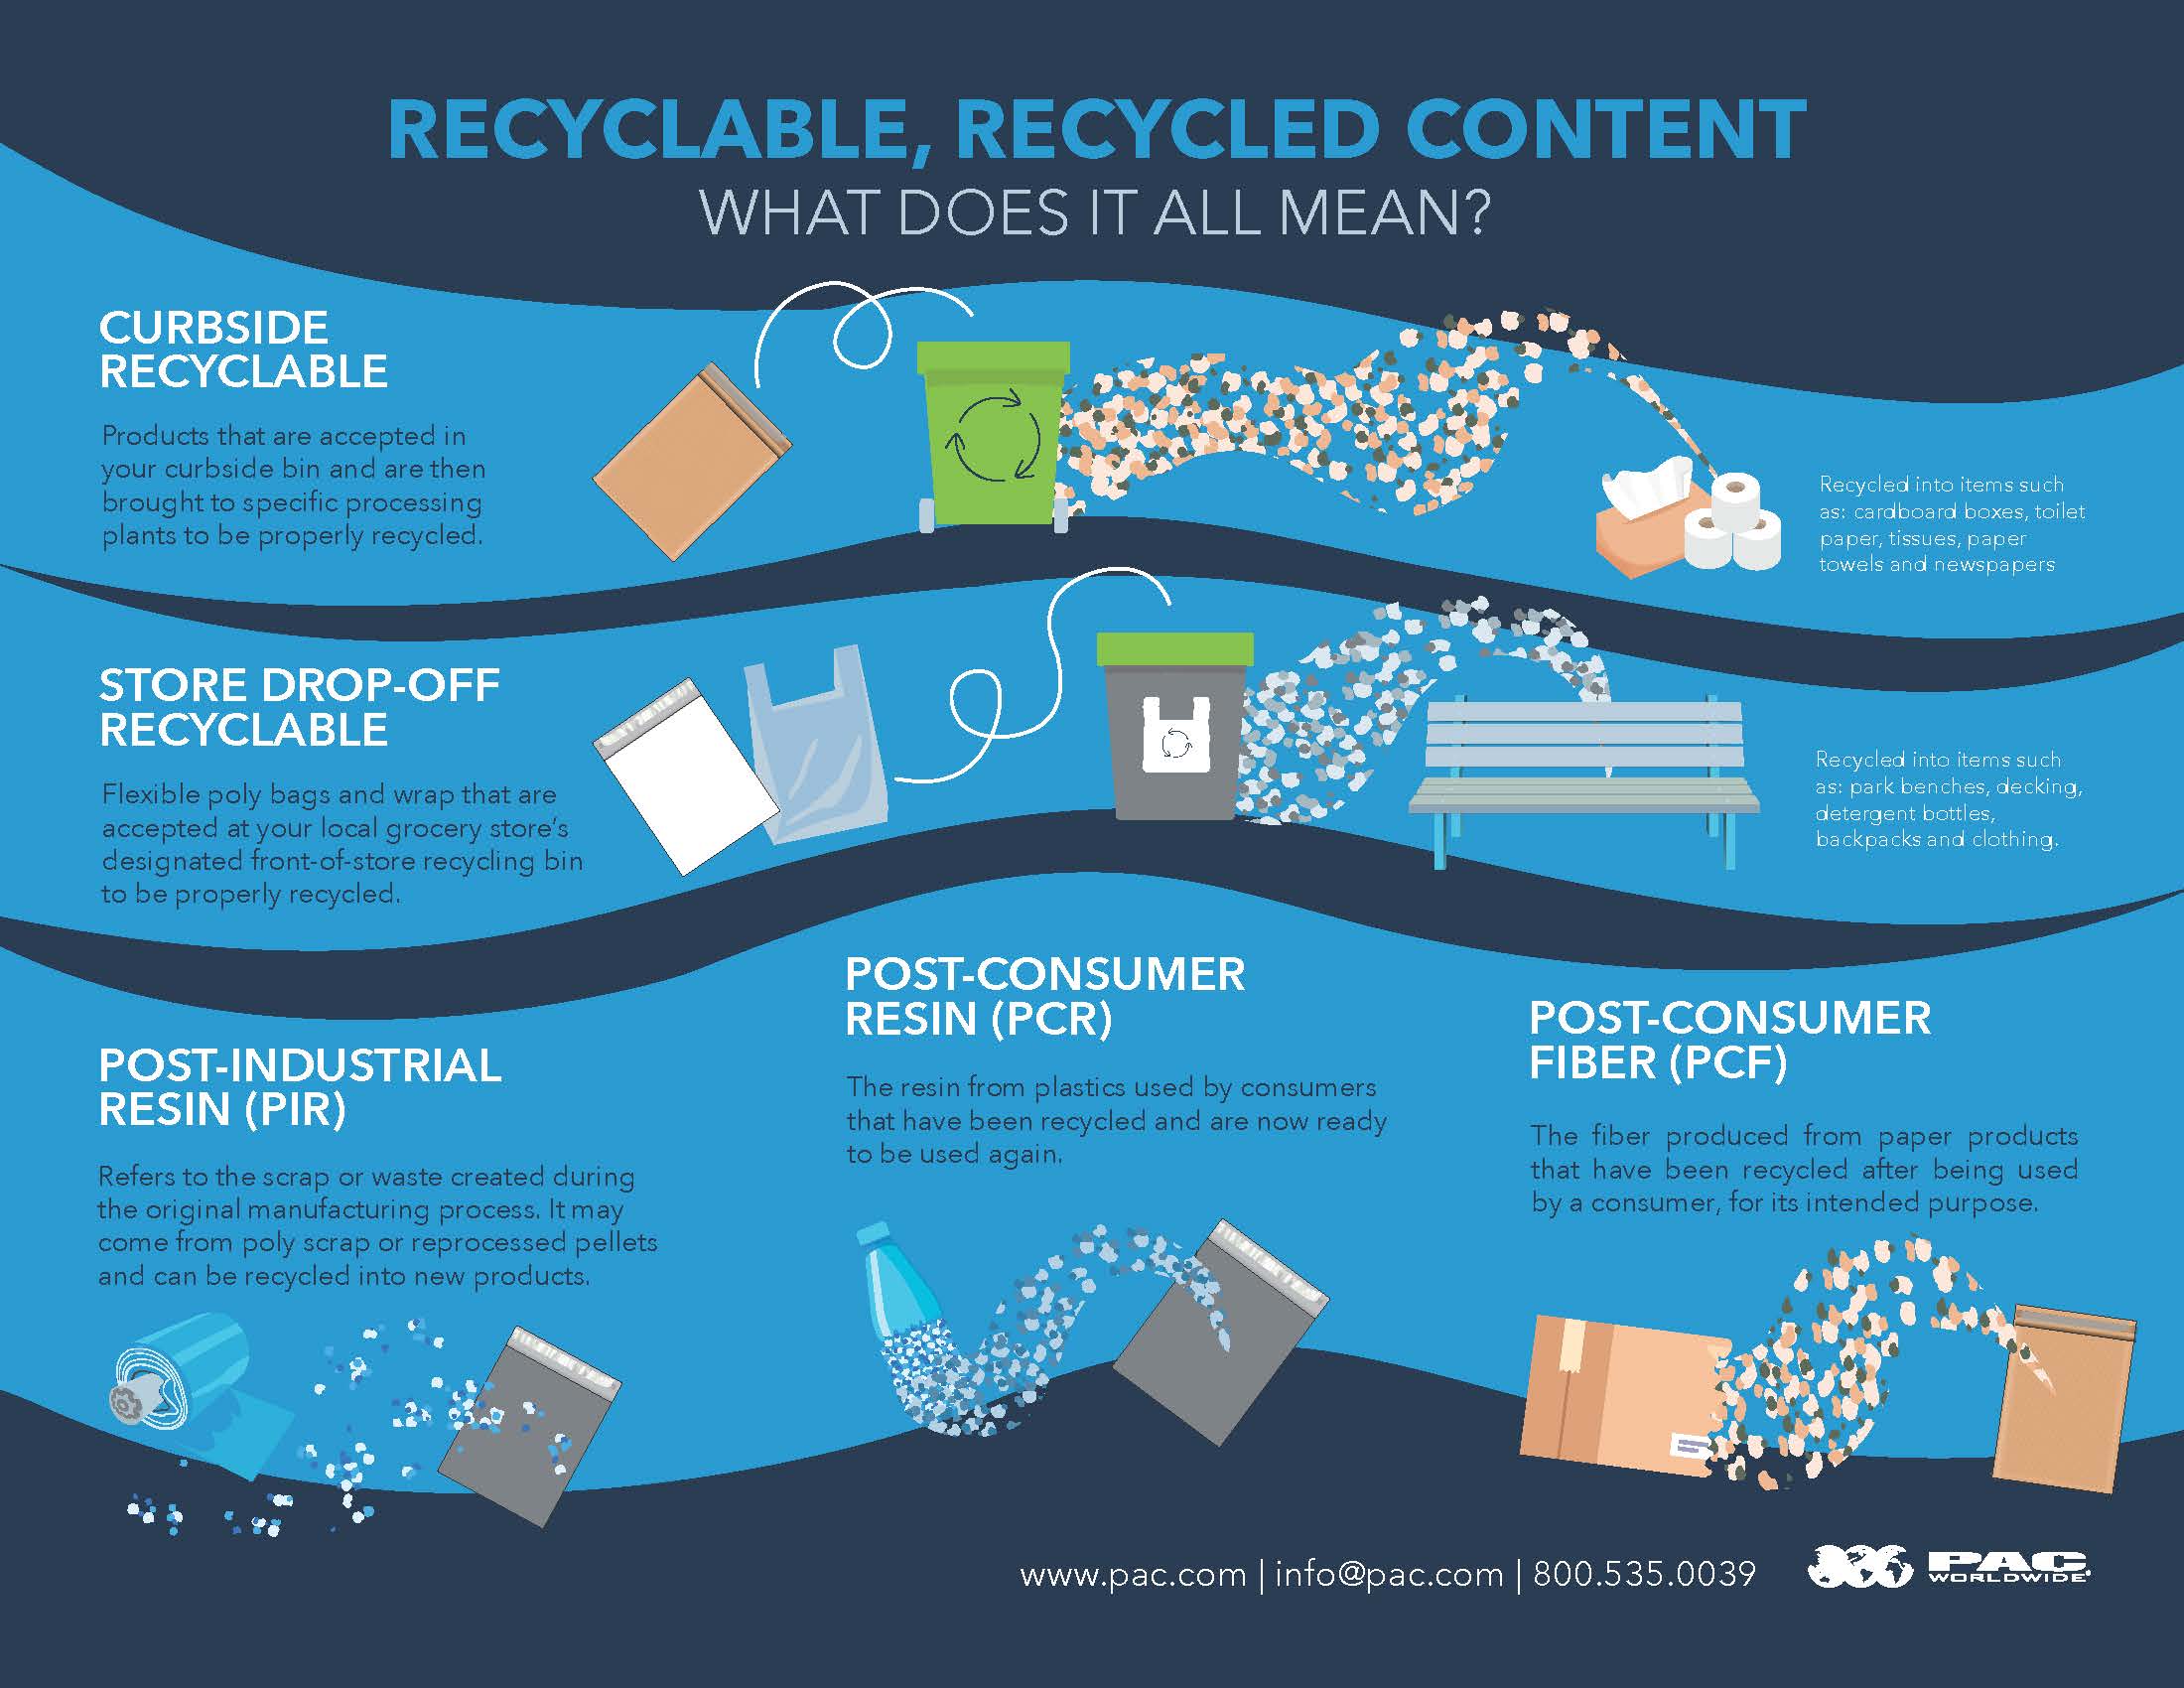 PAC Worldwide recyclable meanings infographic